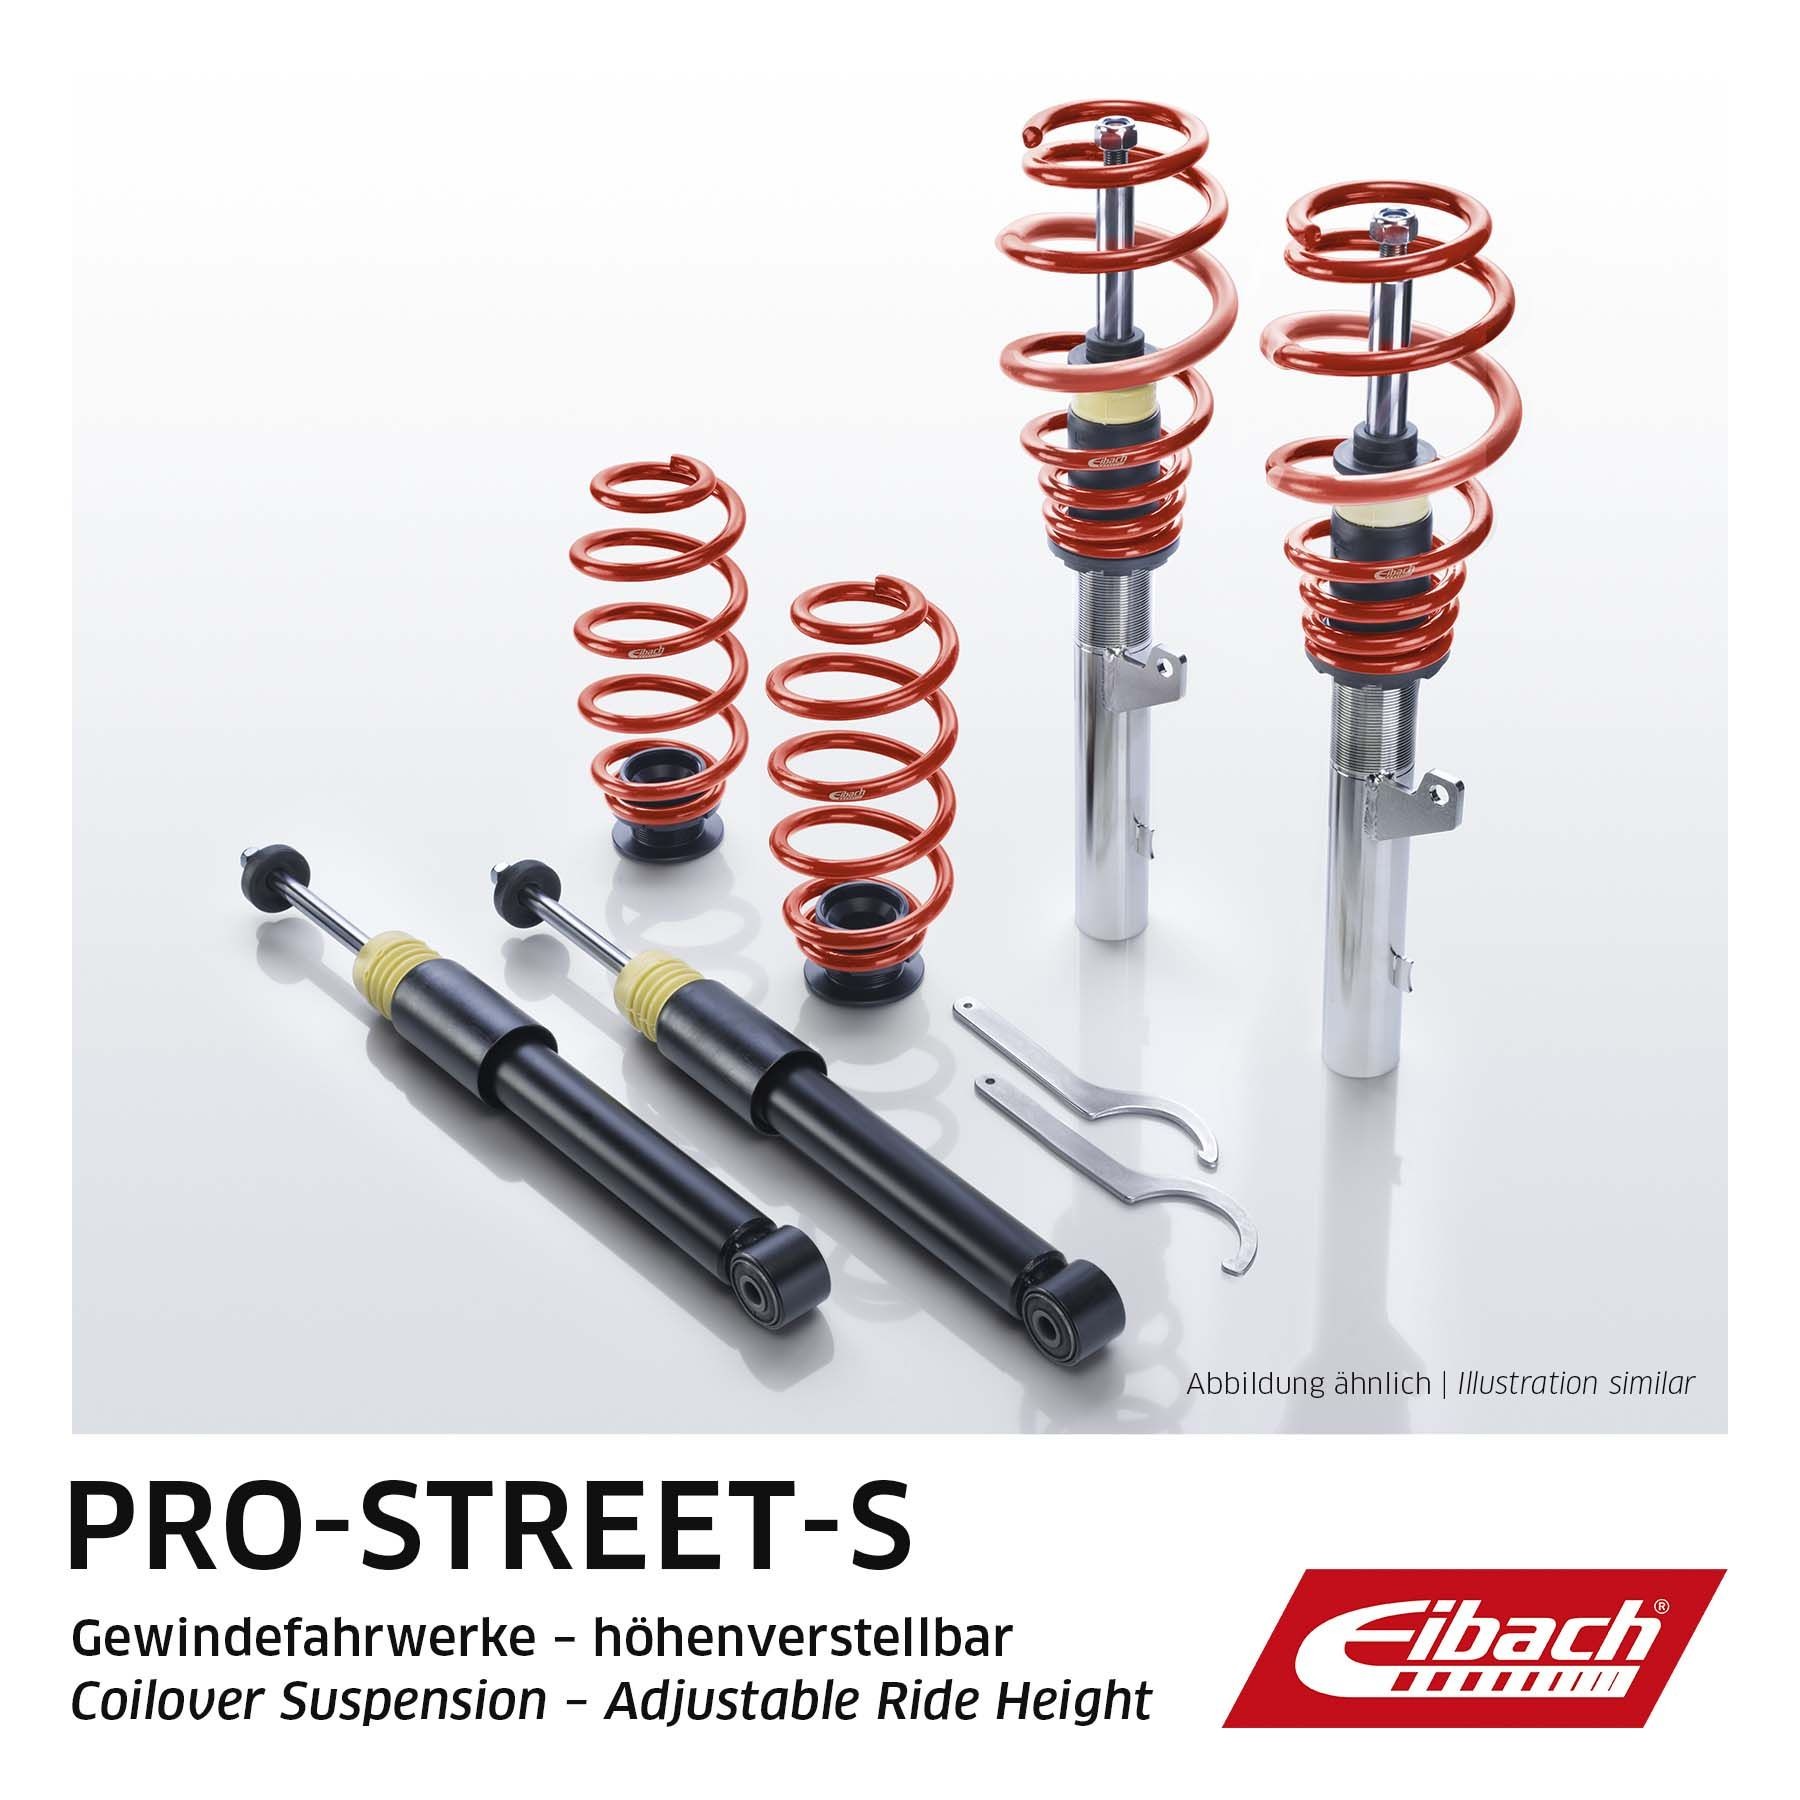 EIBACH Suspension kit, coil springs / shock absorbers VW Golf Plus new PSS65-85-014-02-22